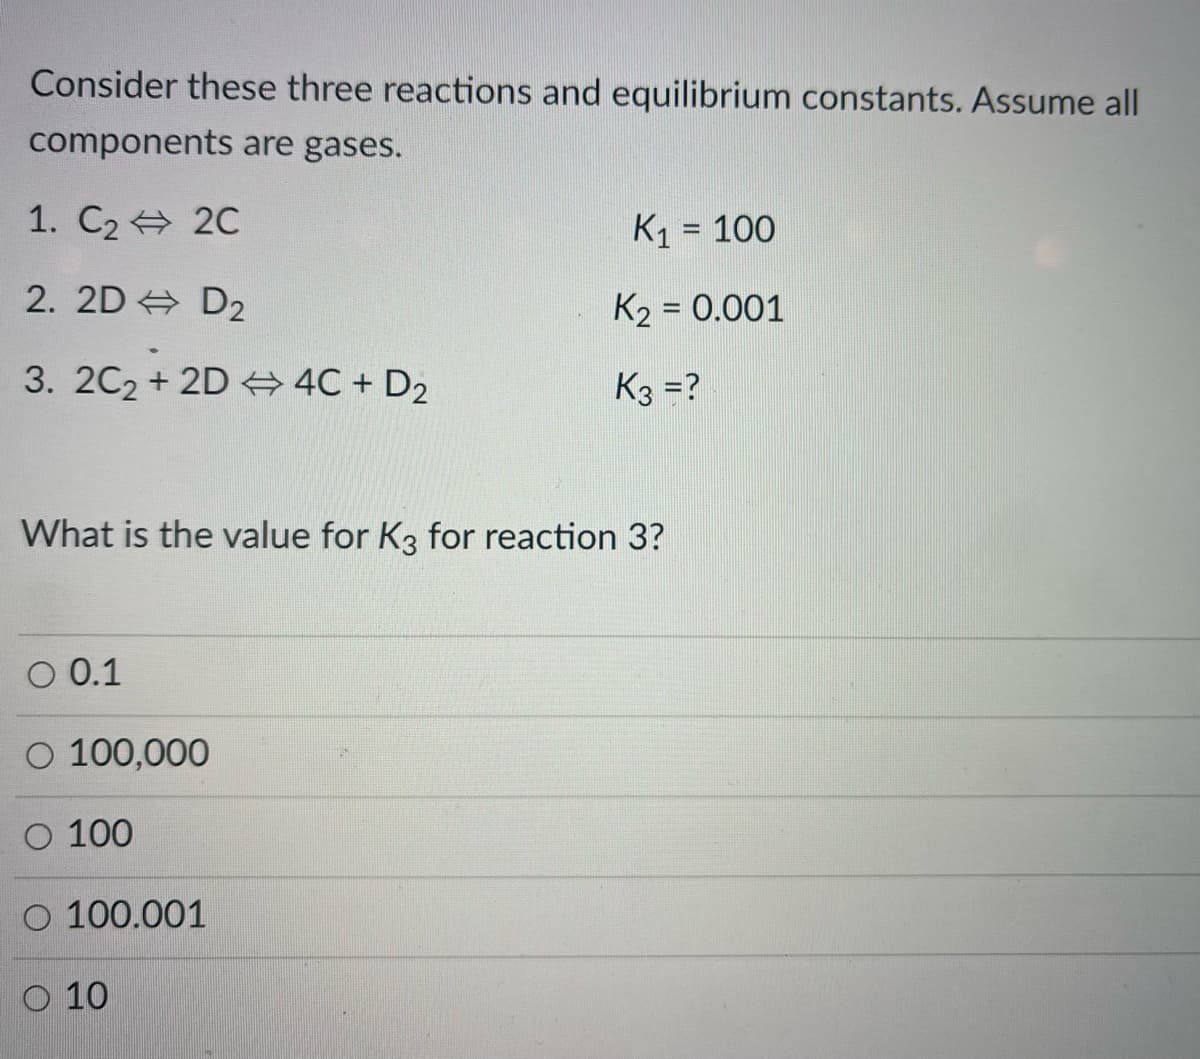 Consider these three reactions and equilibrium constants. Assume all
components are gases.
1. C2 20
K1 = 100
wwwww.
2. 2D + D2
K2 = 0.001
3. 2C2 + 2D 4C + D2
K3 =?
What is the value for K3 for reaction 3?
O 0.1
O 100,000
О 100
O 100.001
O 10
